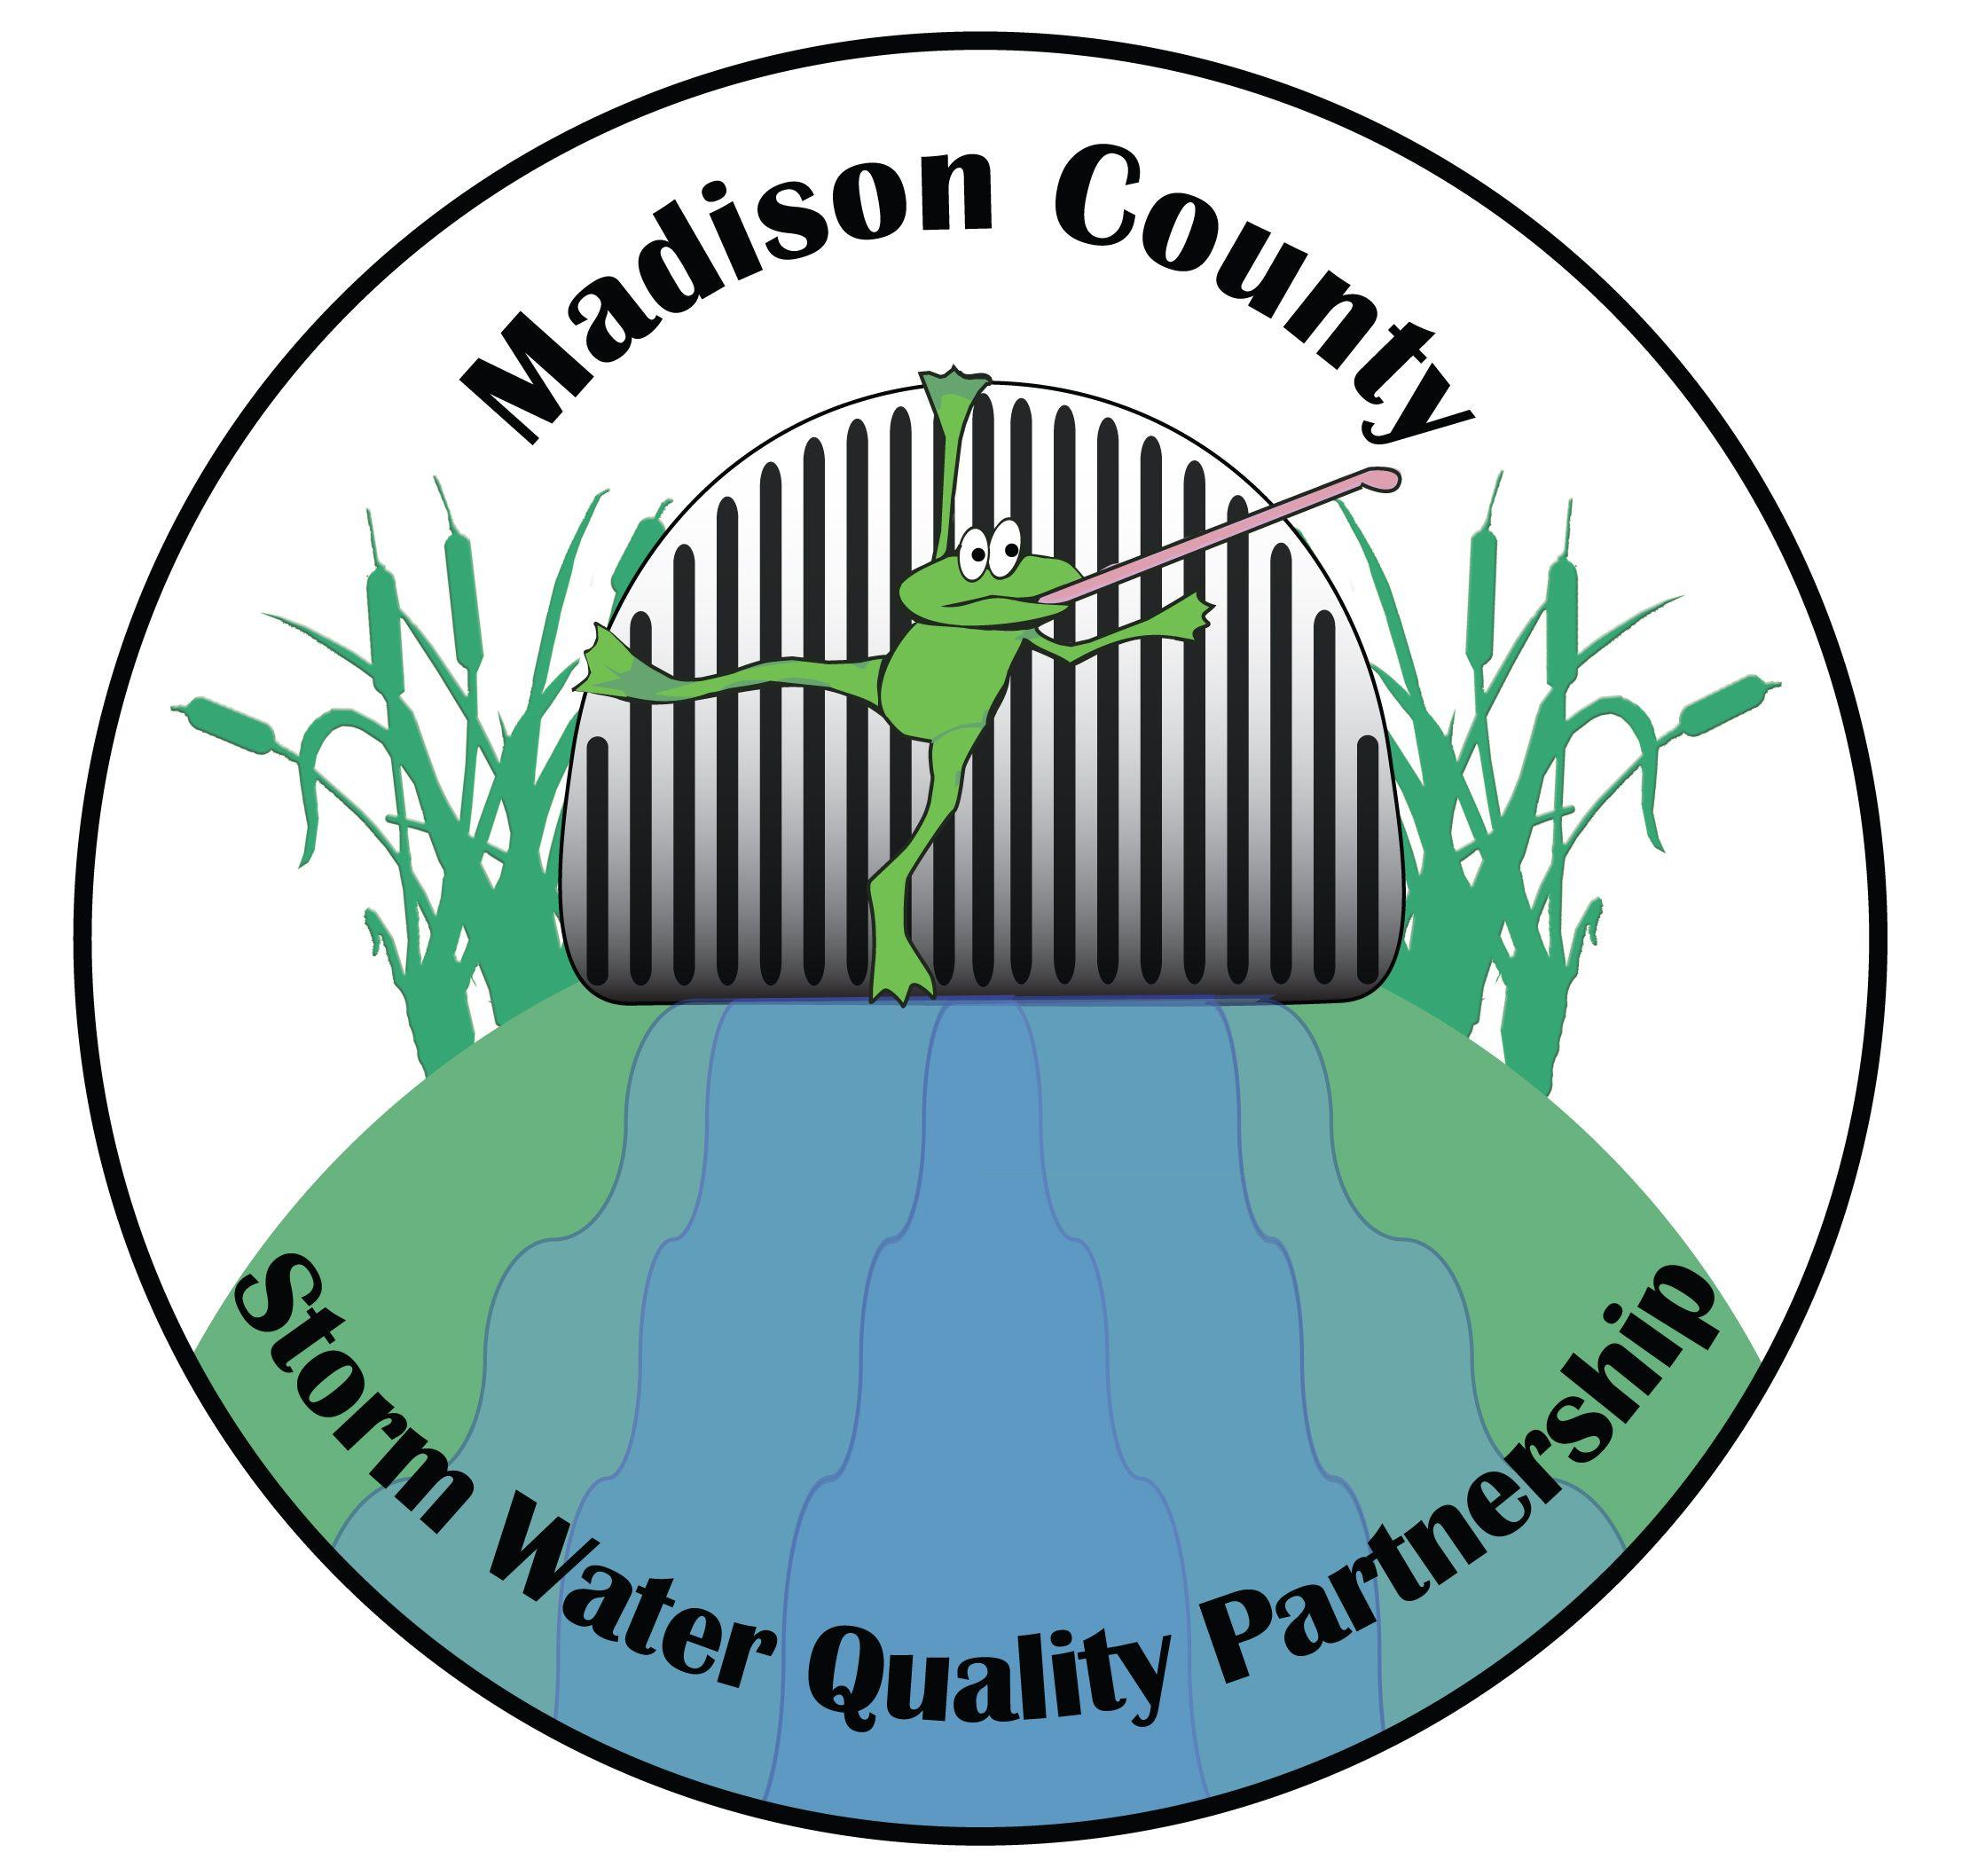 MS4 Logo - Welcome to the Madison County Storm Water Quality Partnership